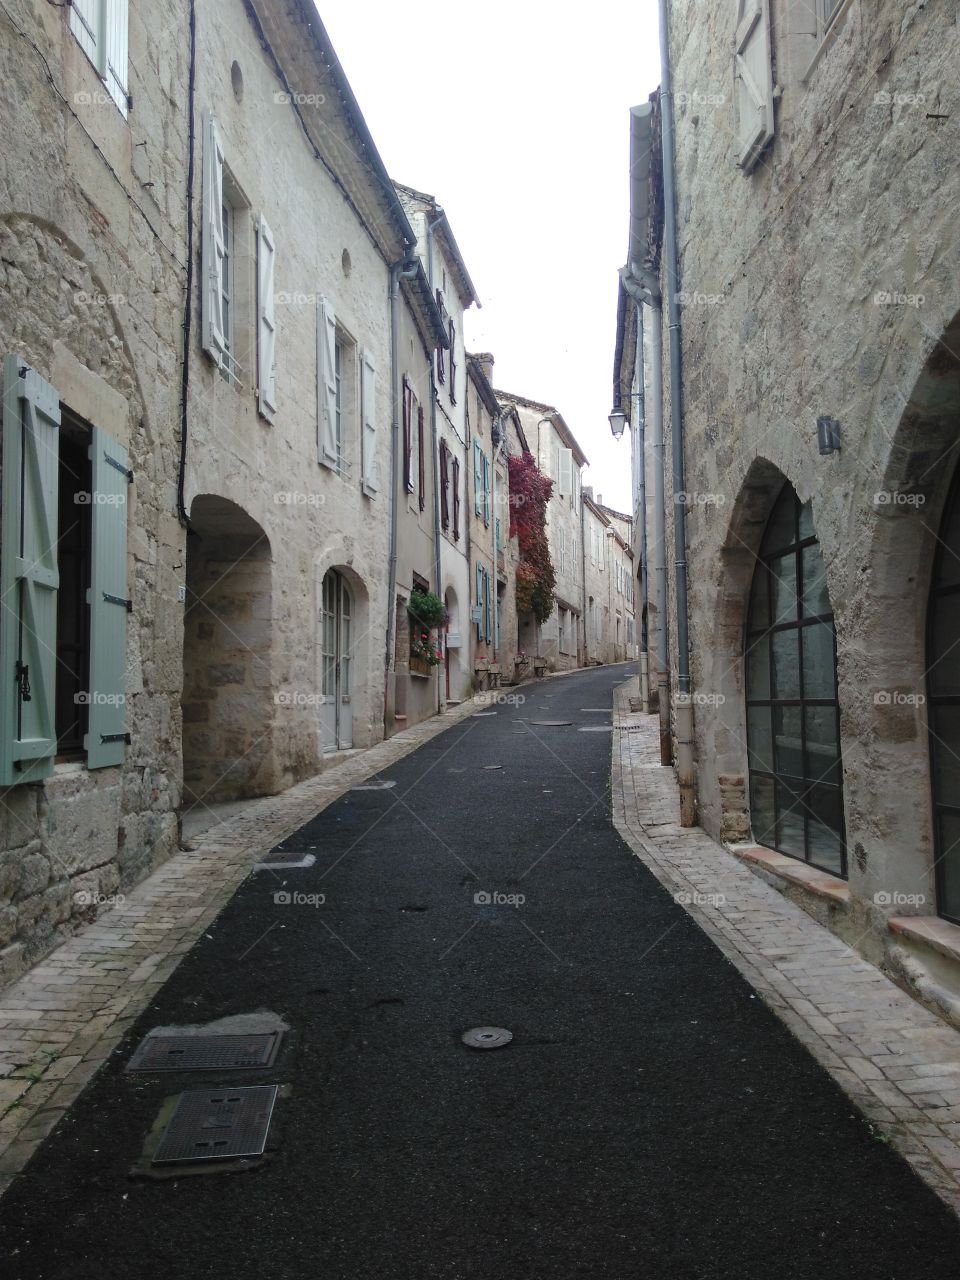 Little street in the town of Moncuq, in France.